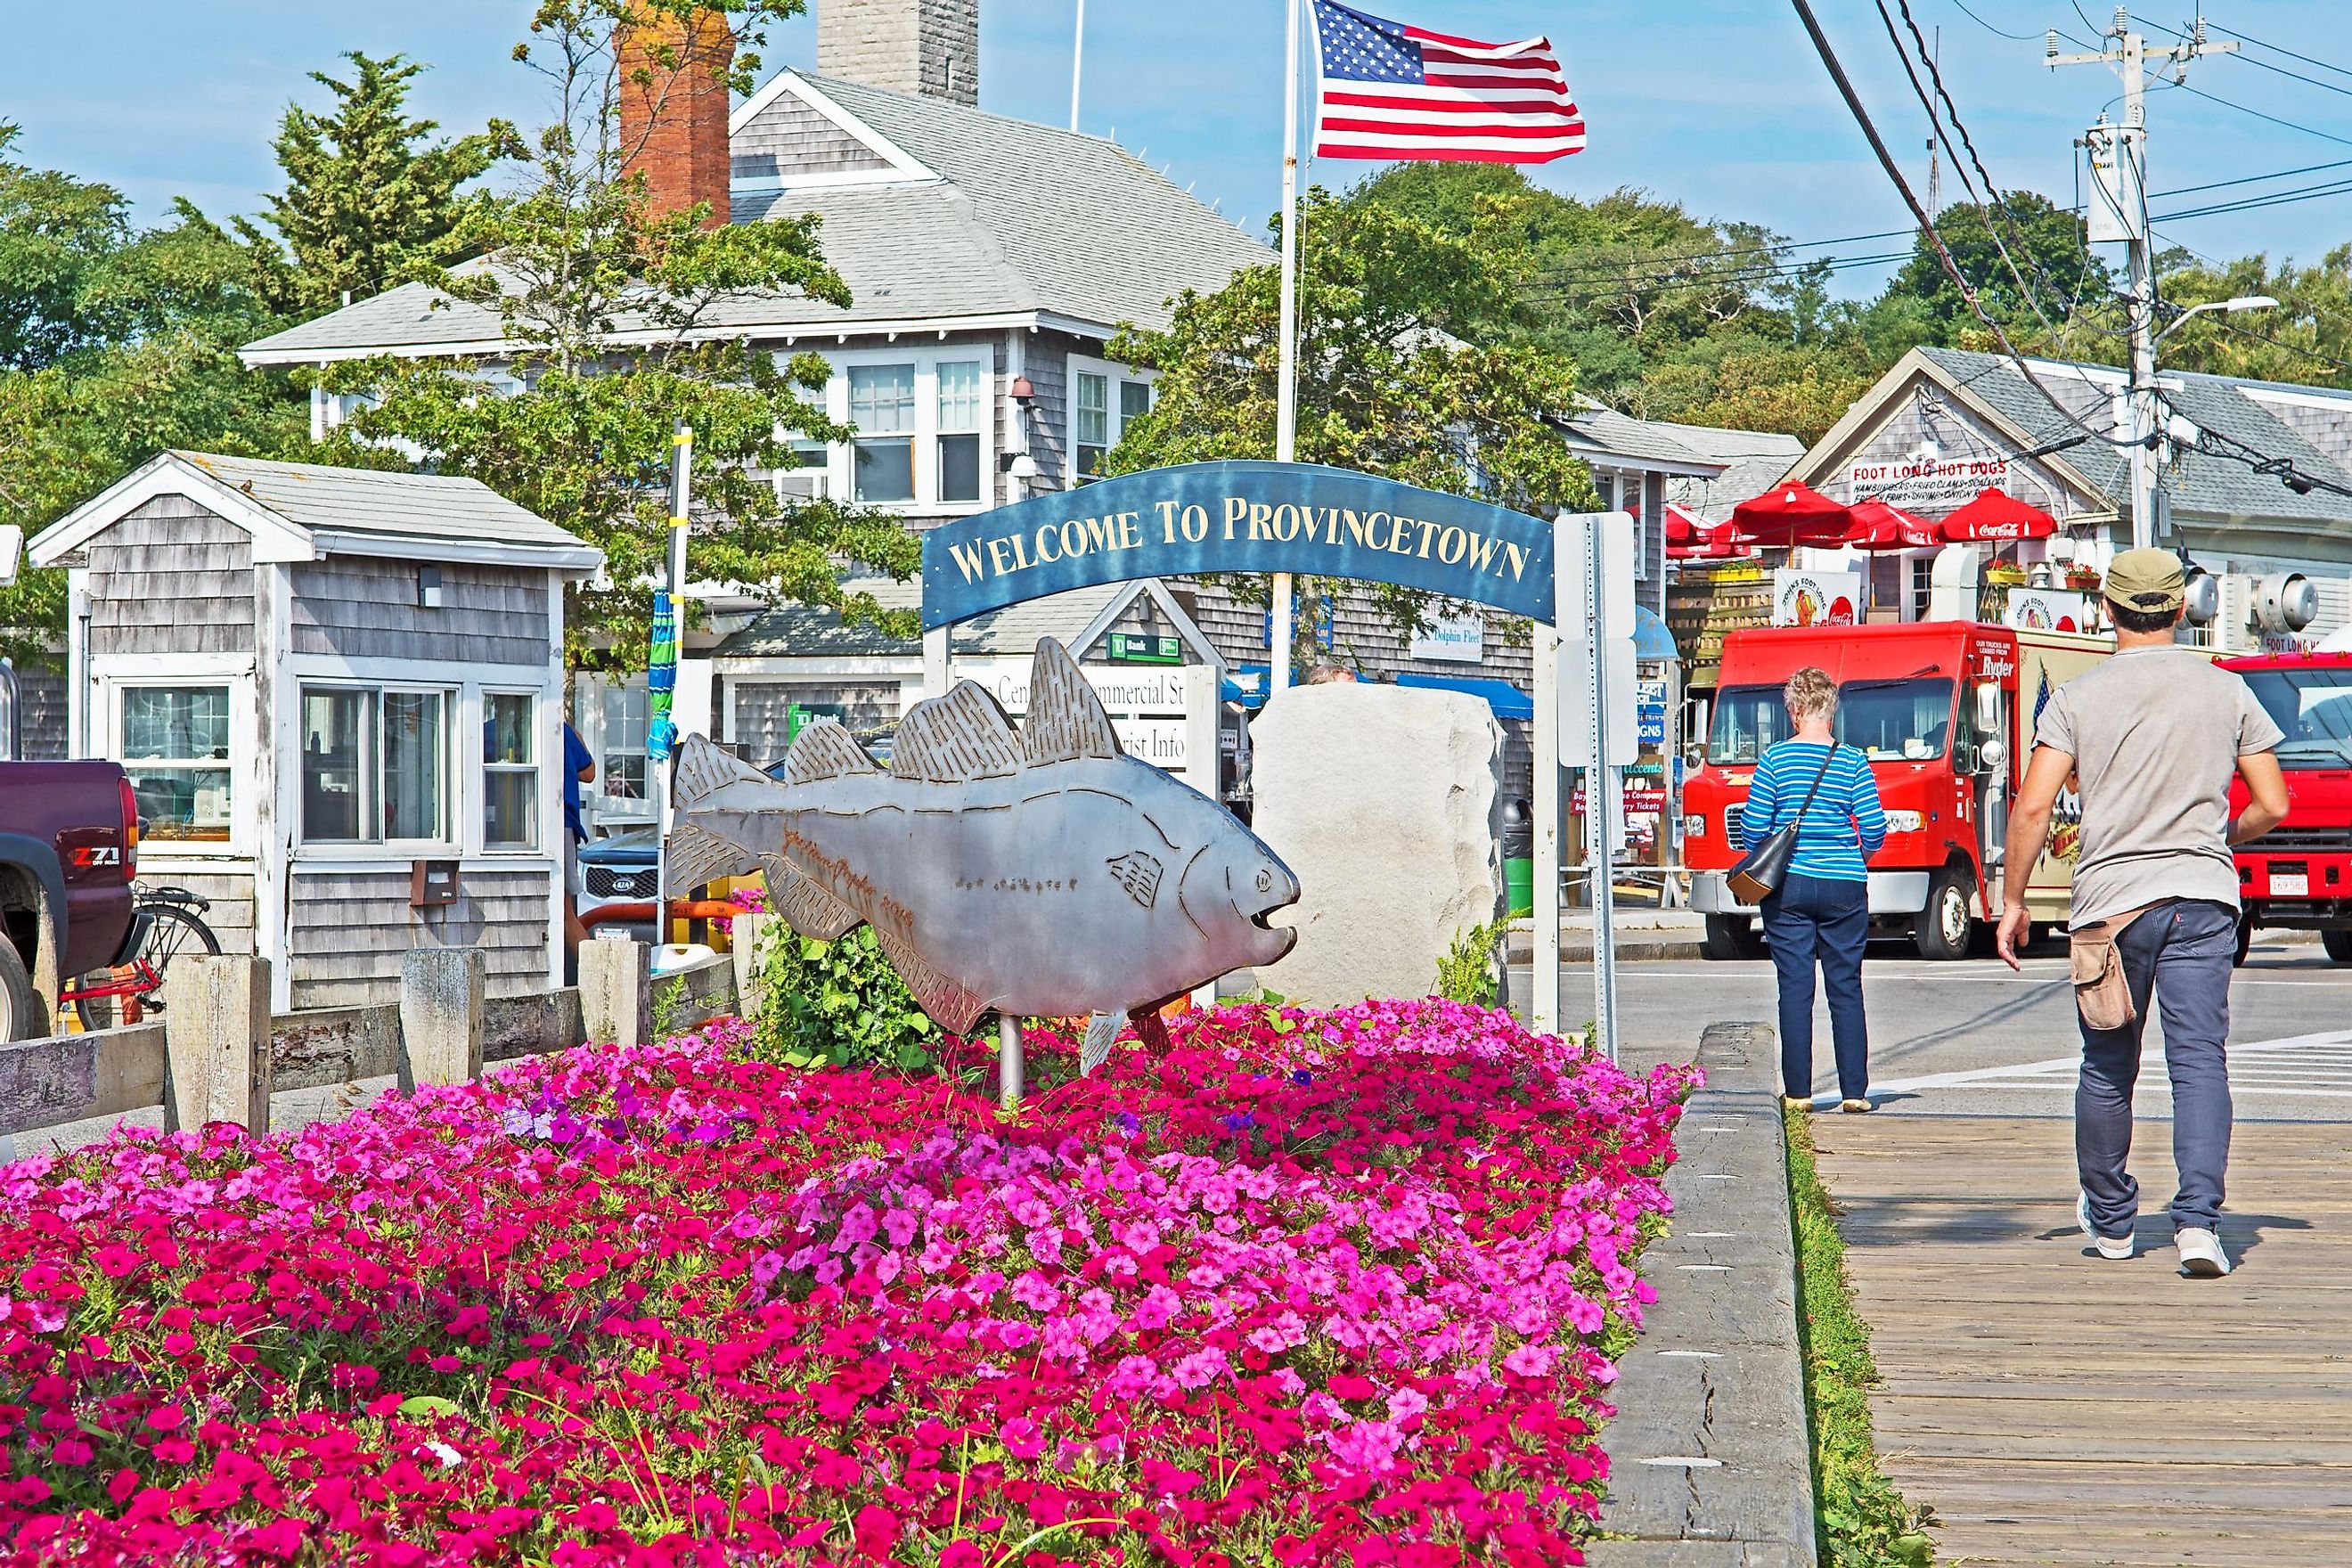 at the entry to the Macmillan Wharf, a sign welcomes visitors to Provincetown.